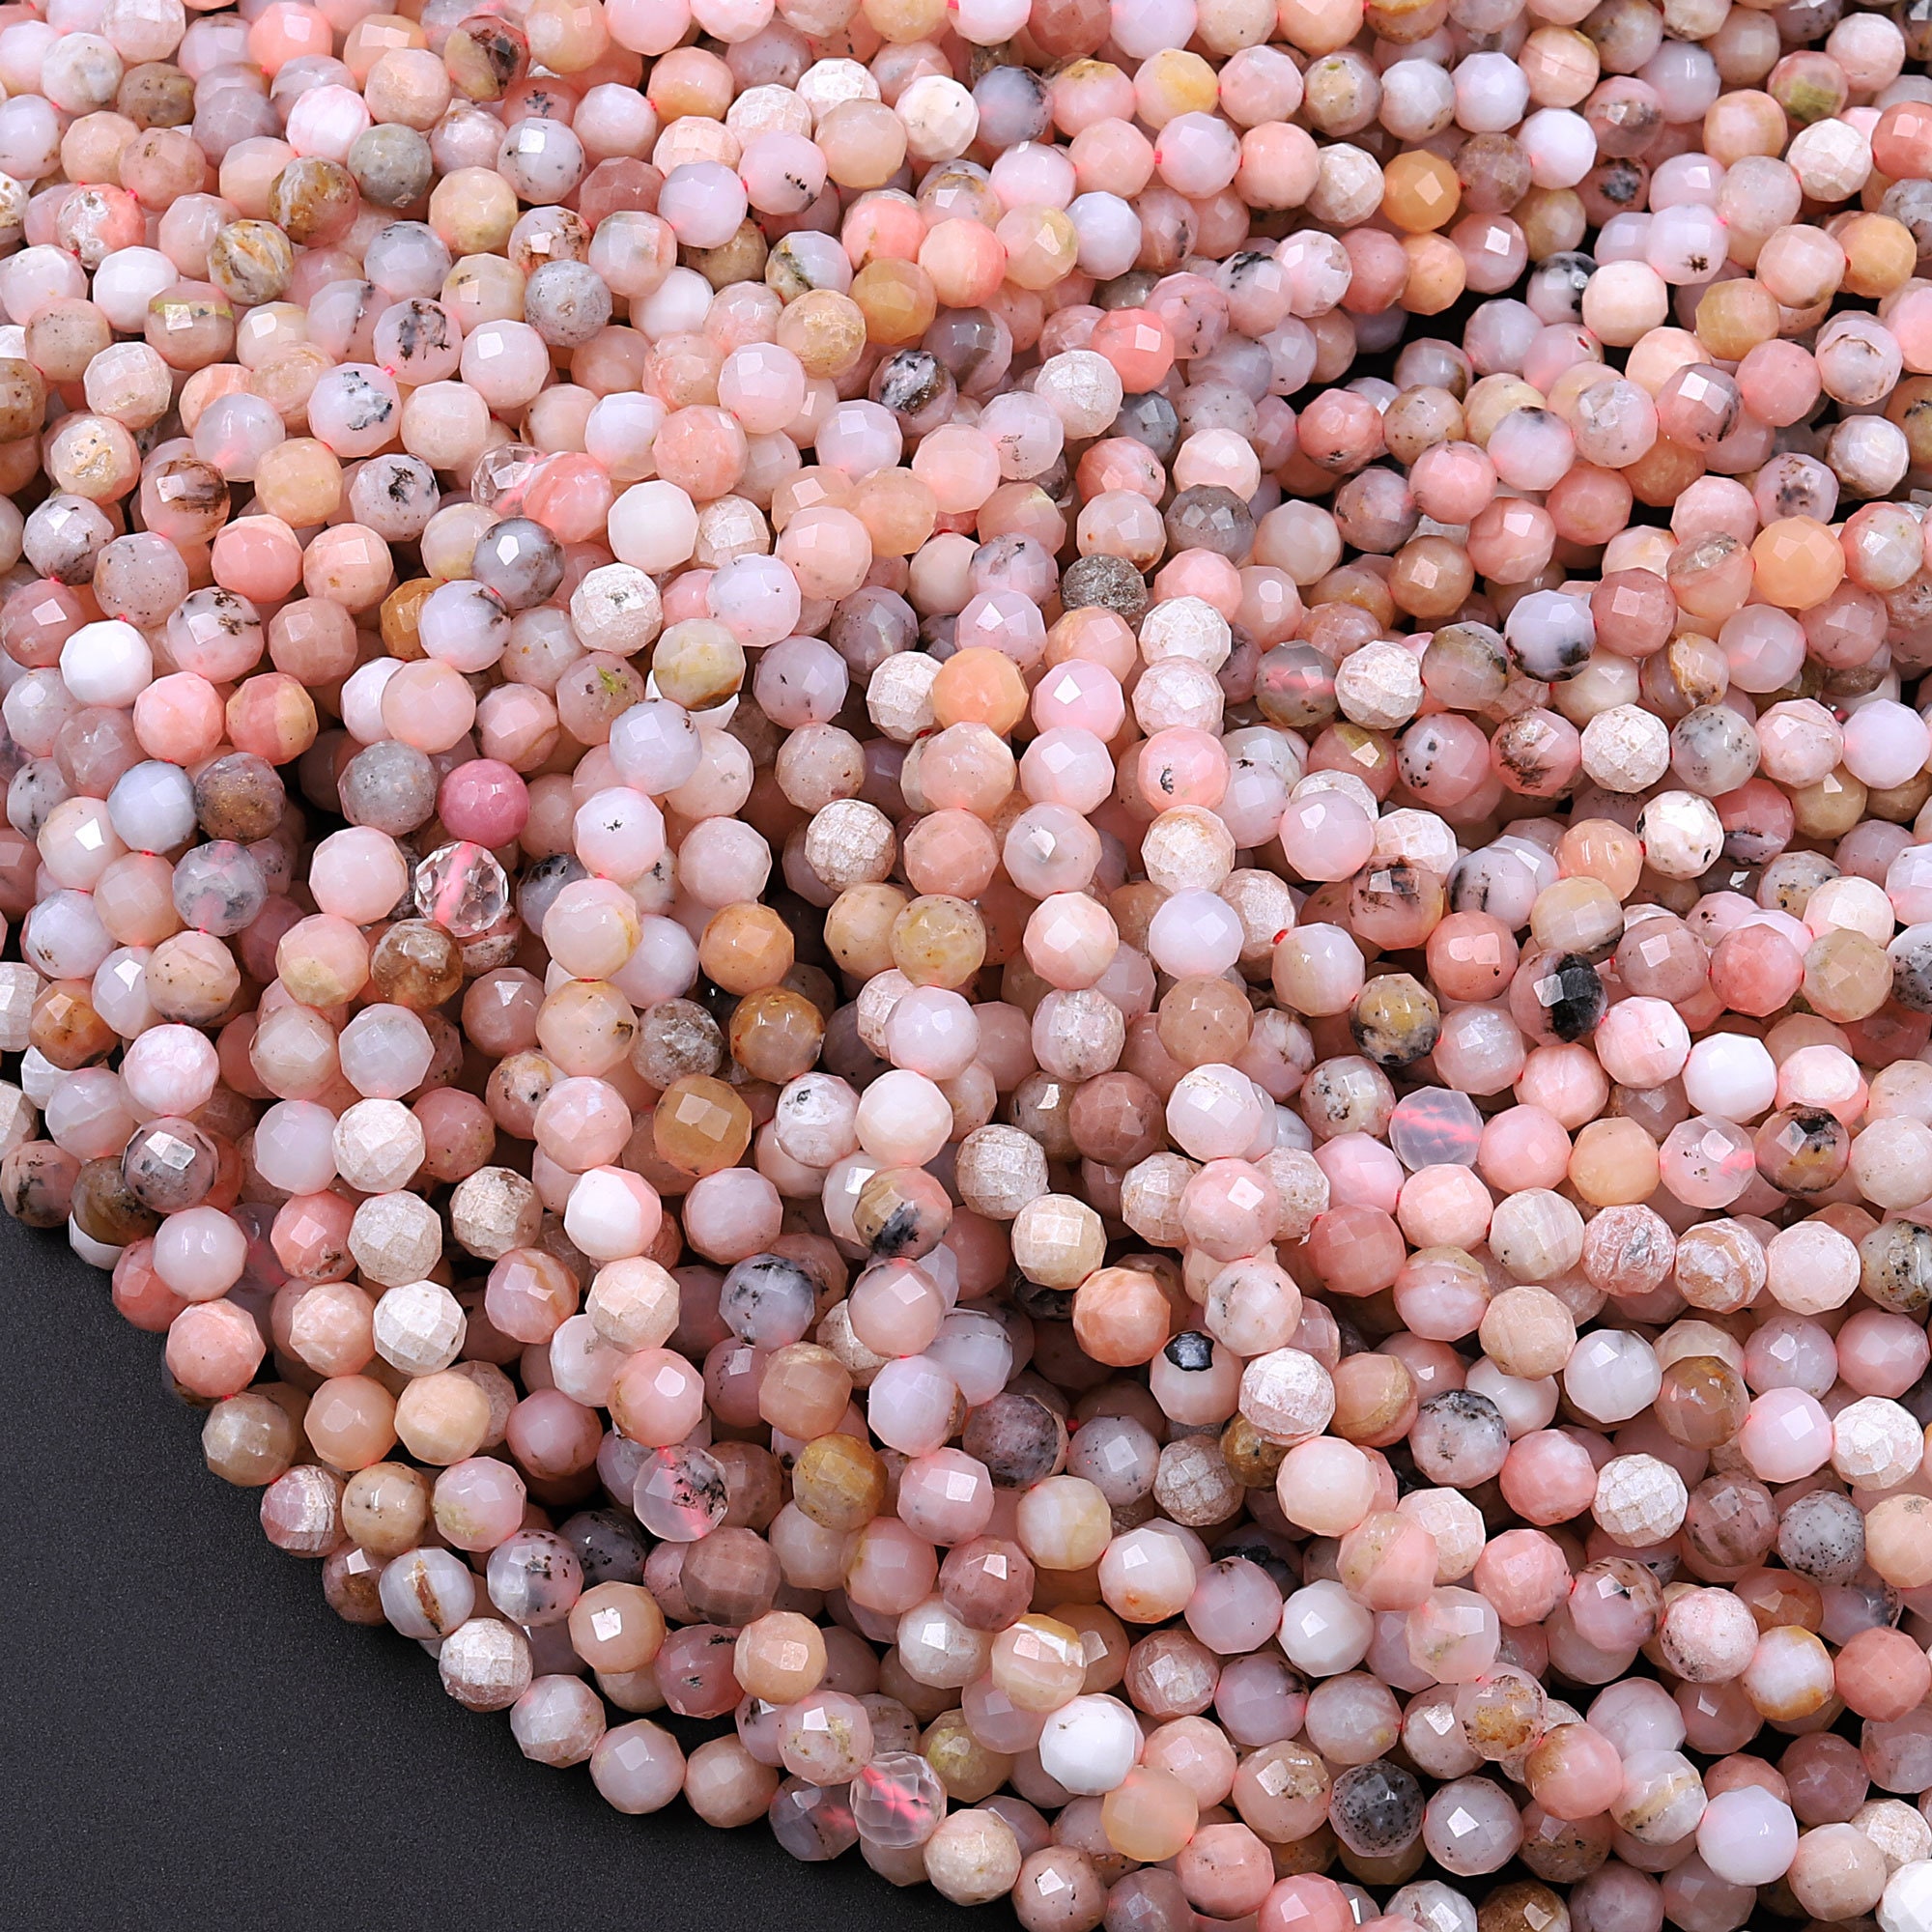 Round Polished Light Pink Opal Bead String, Size: 2mm (diameter